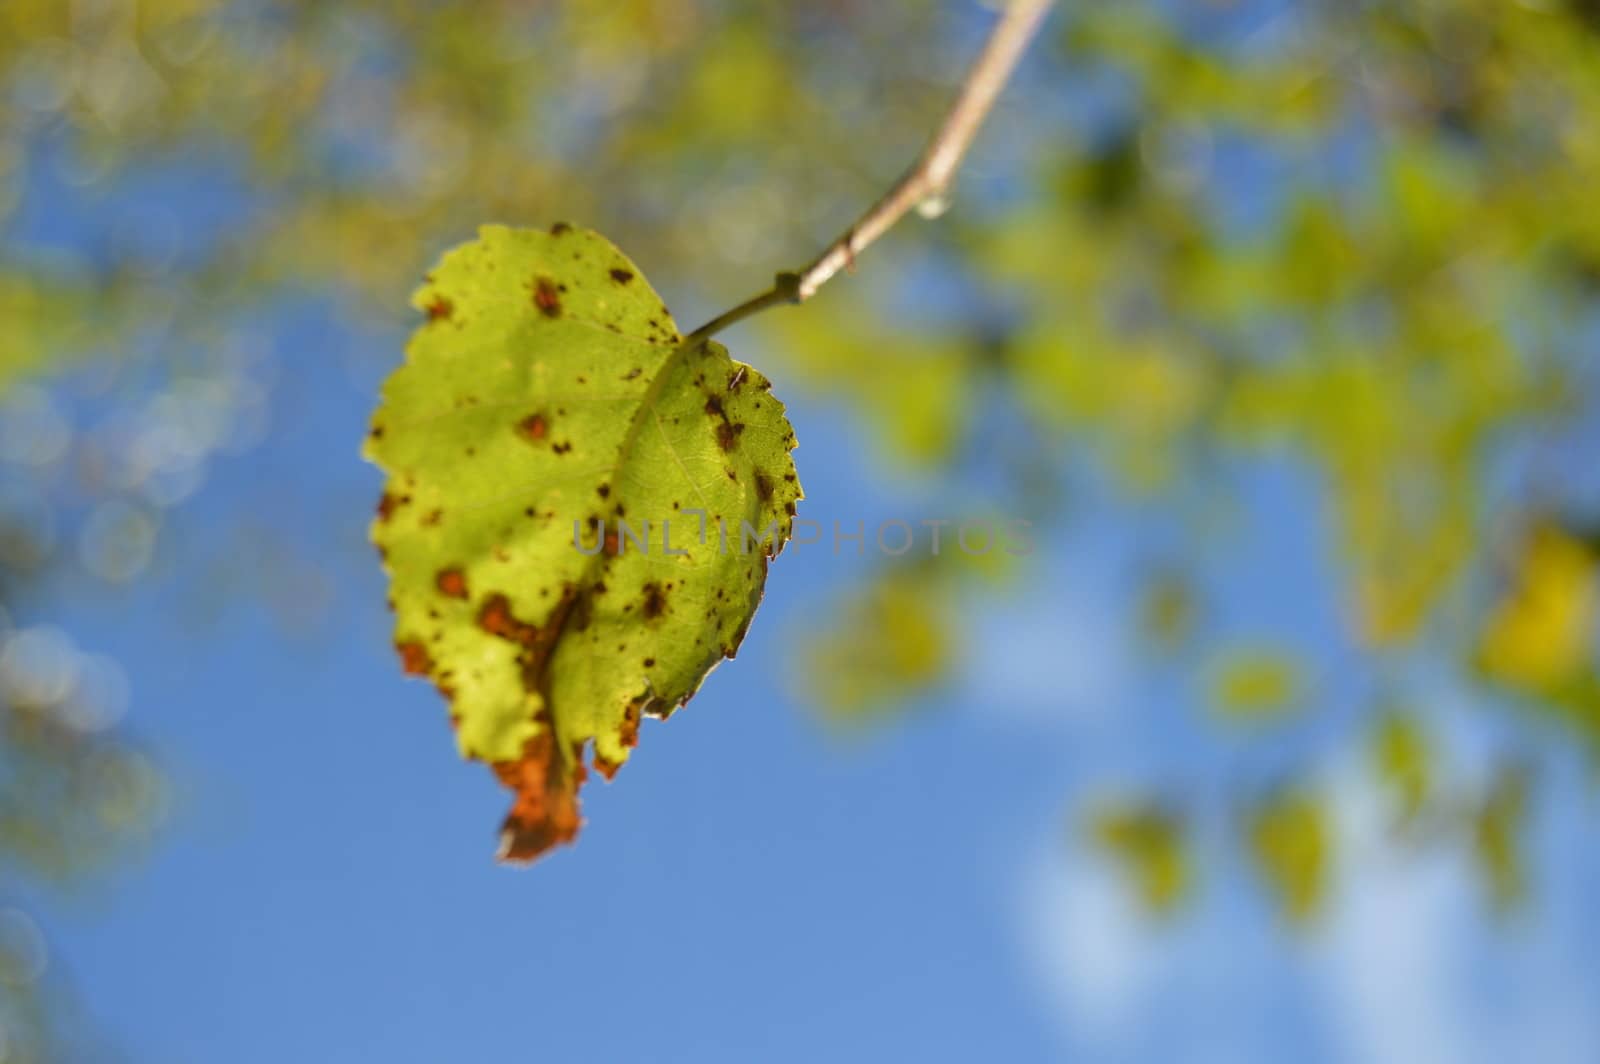 Birch leaf with spots on it in the summer sun